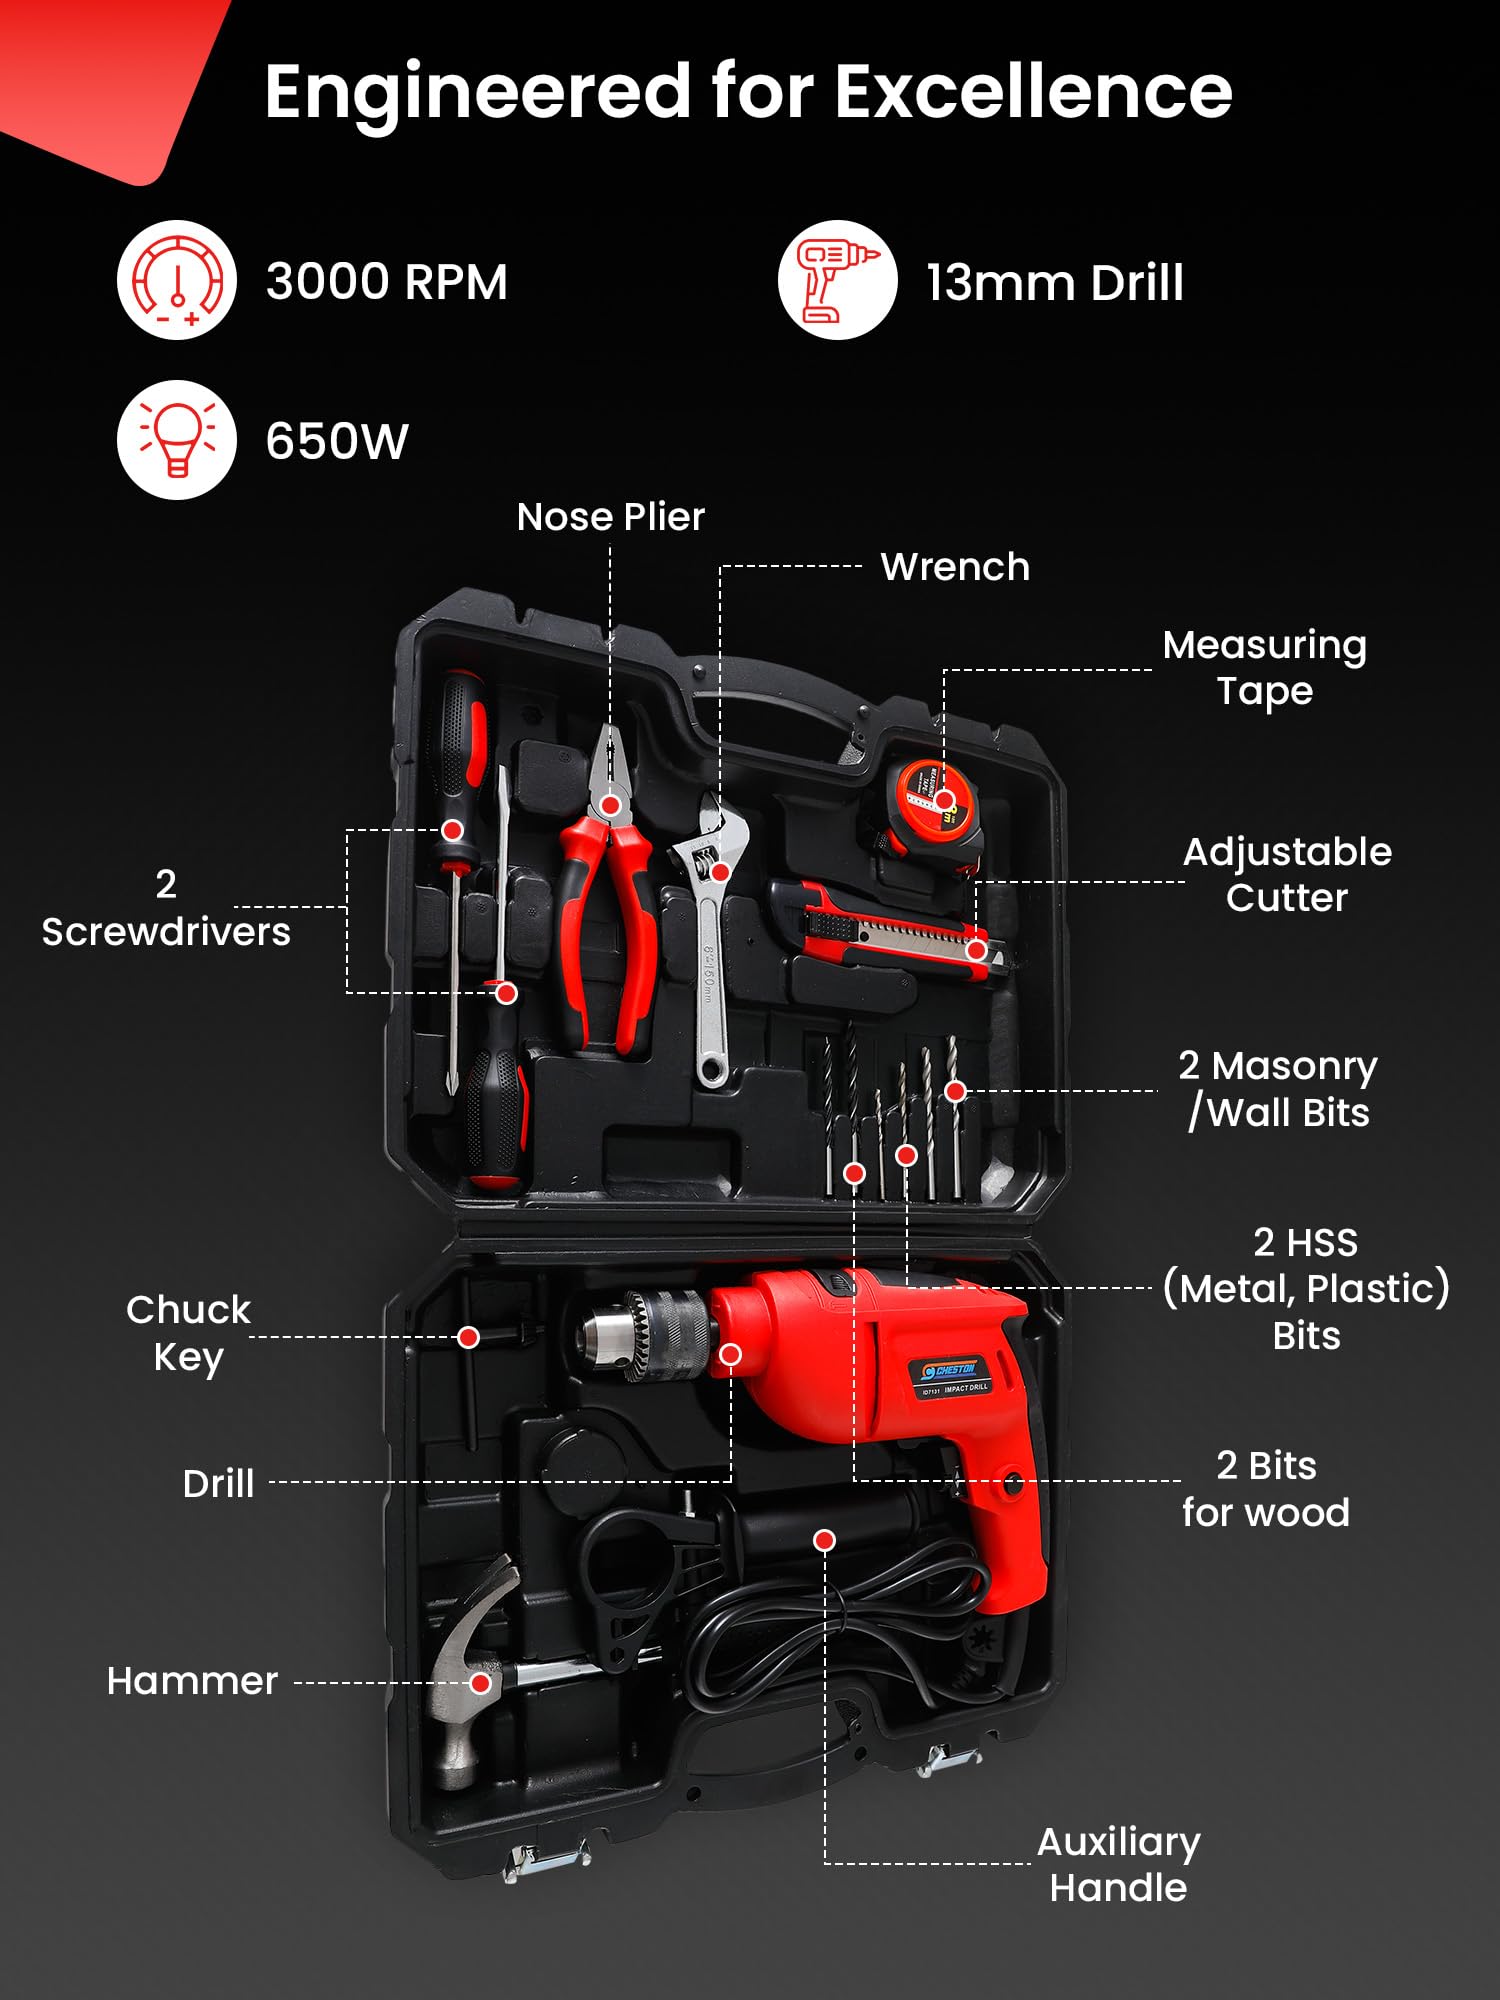 Cheston 13mm Drill Kit 650W Powerful Impact Drill Machine Kit | 3000RPM | Screwdriver Kit with 17 Pieces Tool Kit and Accessories | Drill Bits Tape Hammer Plier Screwdriver